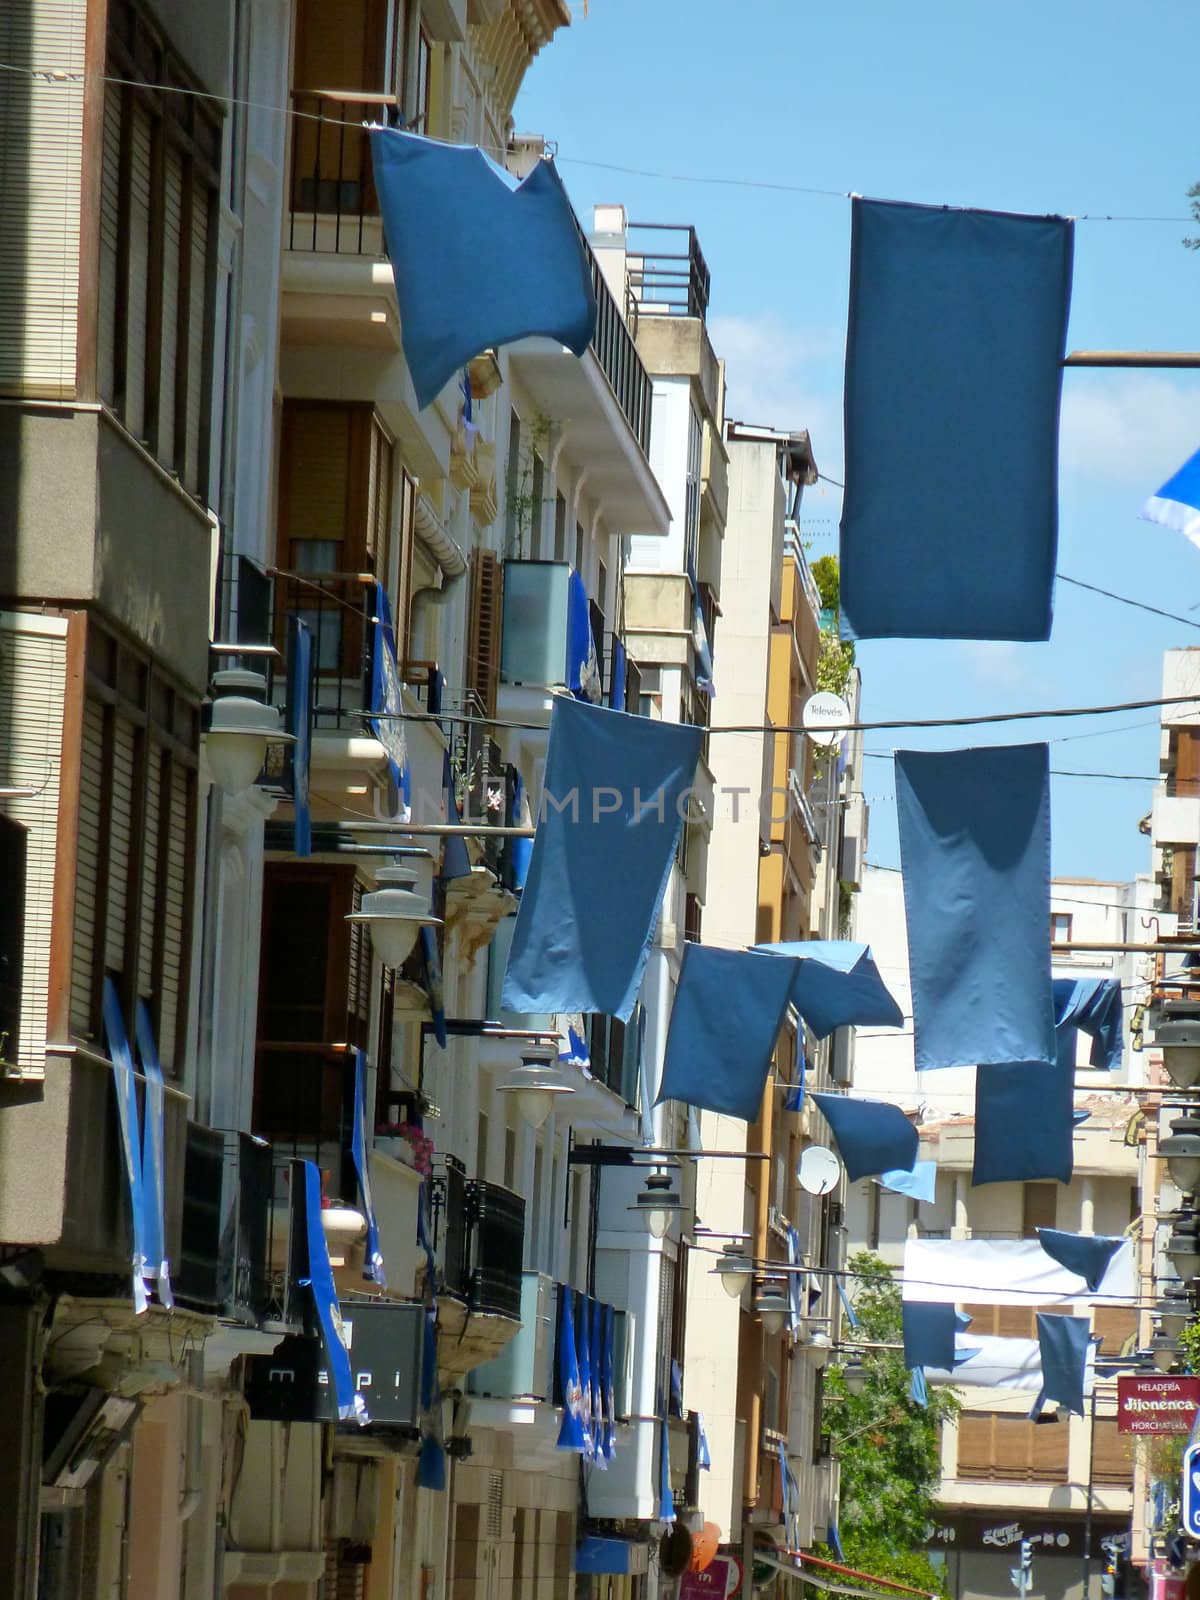 blue flags hanging in a street for a fiesta